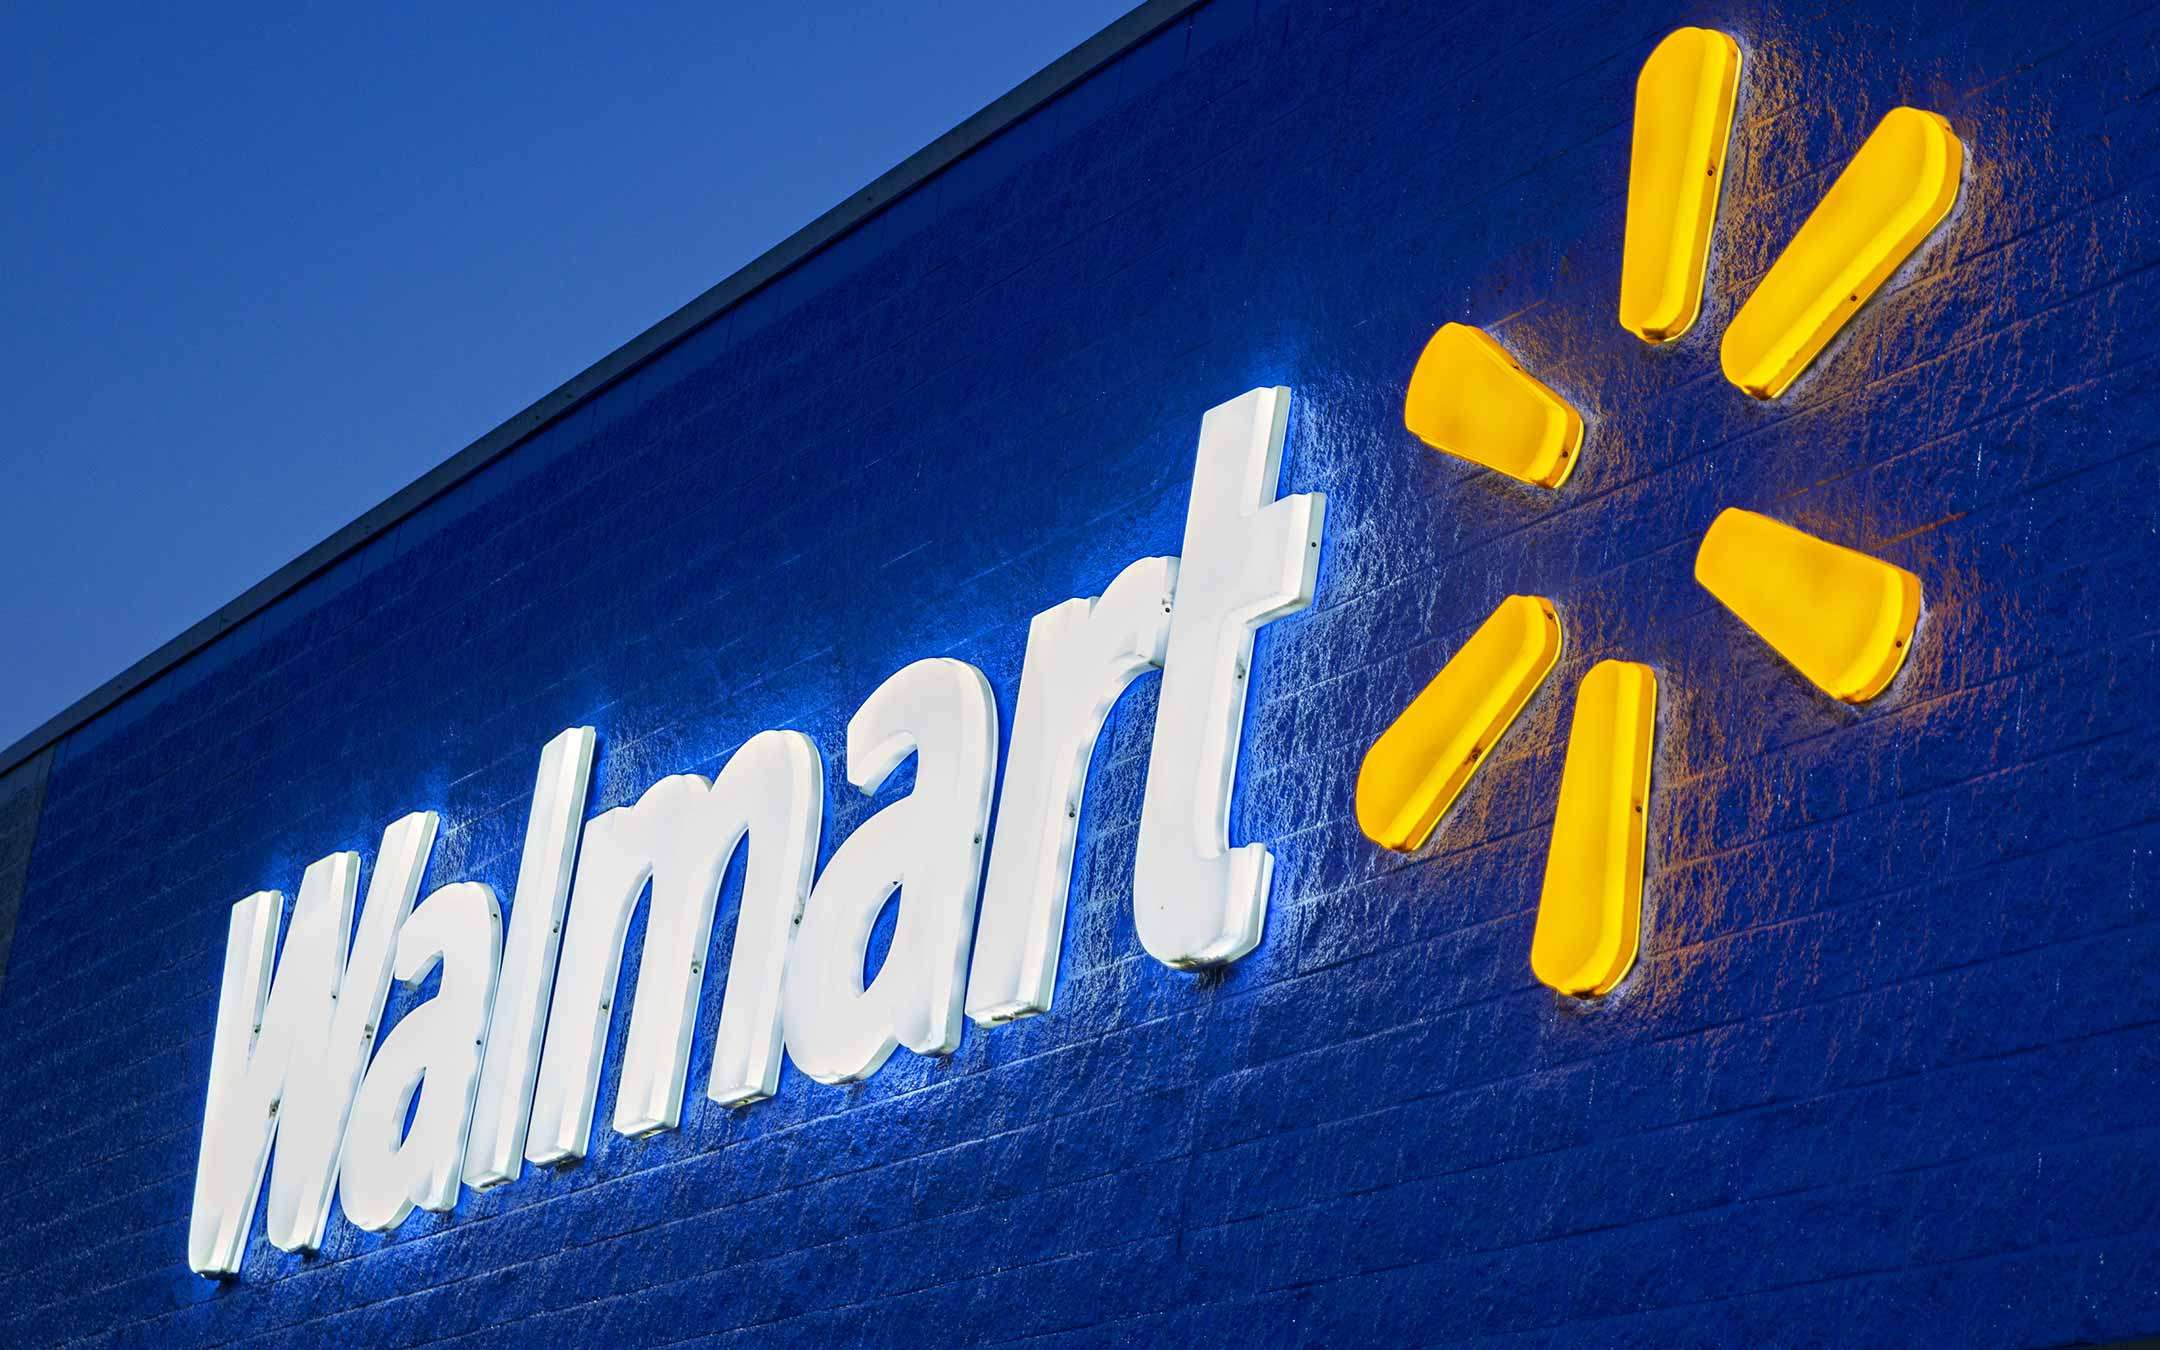 Walmart challenges Amazon on delivery drones